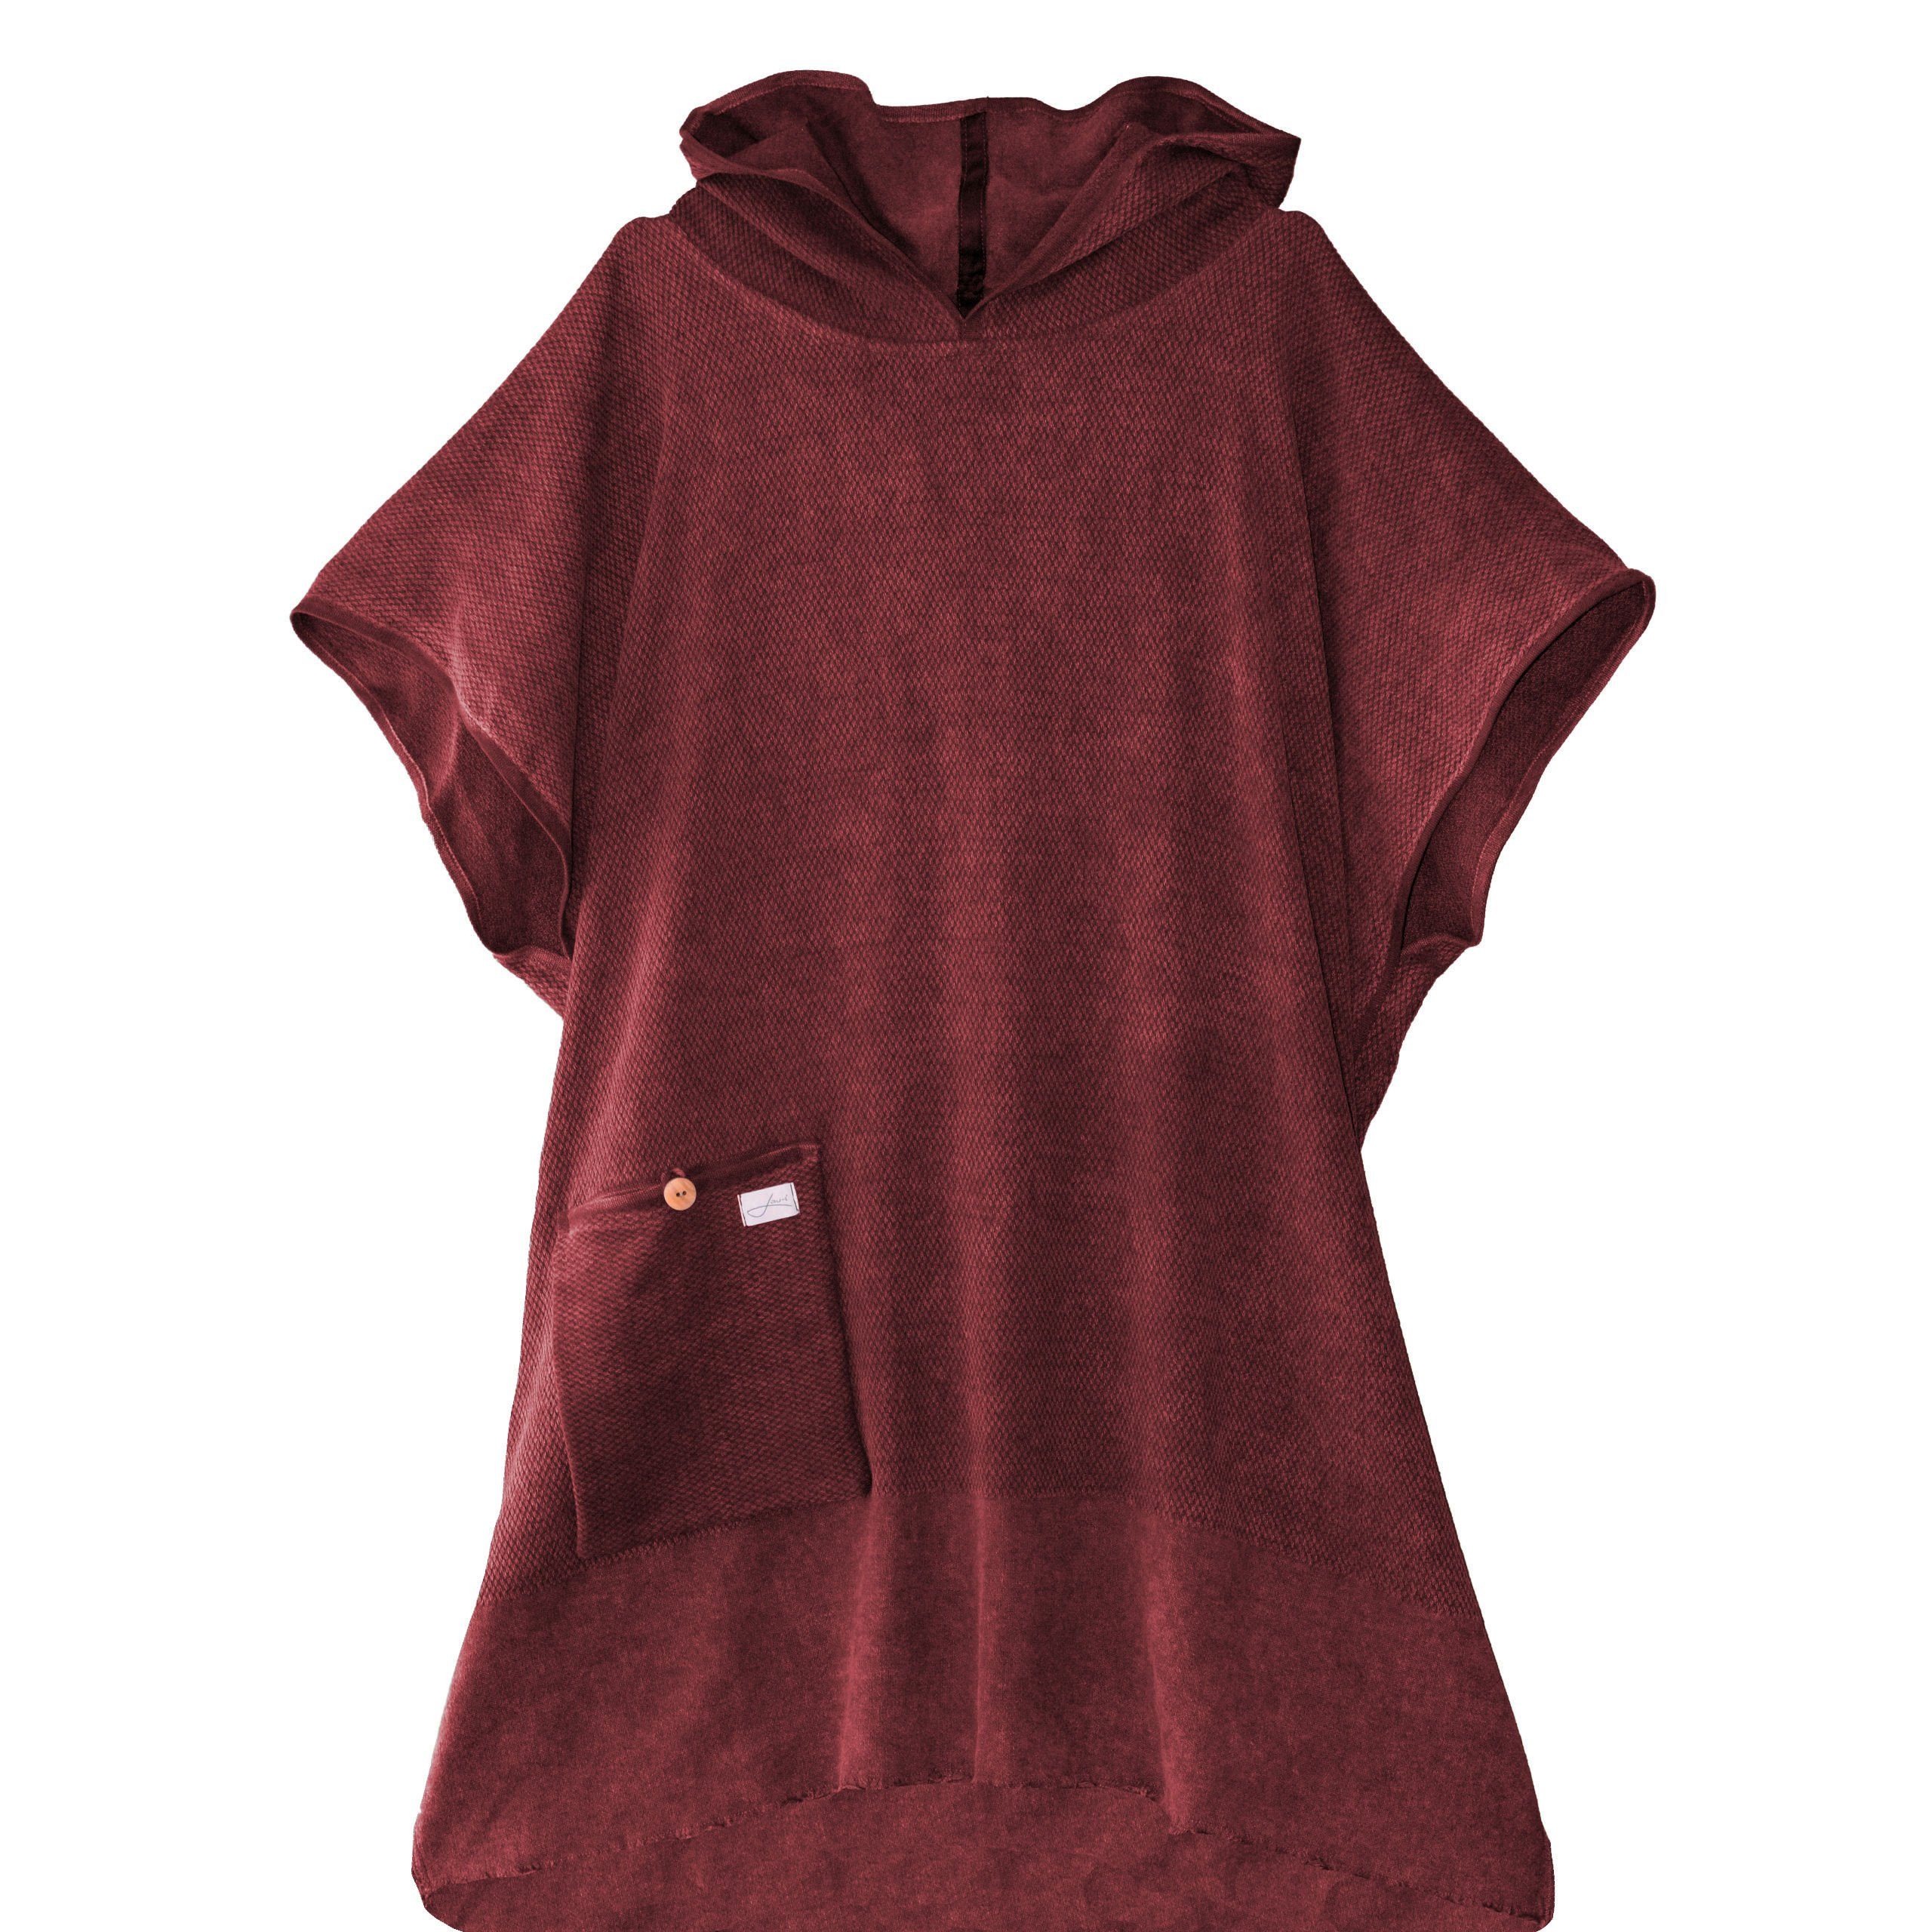 burgundy Badeponcho Badeponcho Germany Made & (leicht in Lou-i Surfponcho Kapuze schnell trocken),